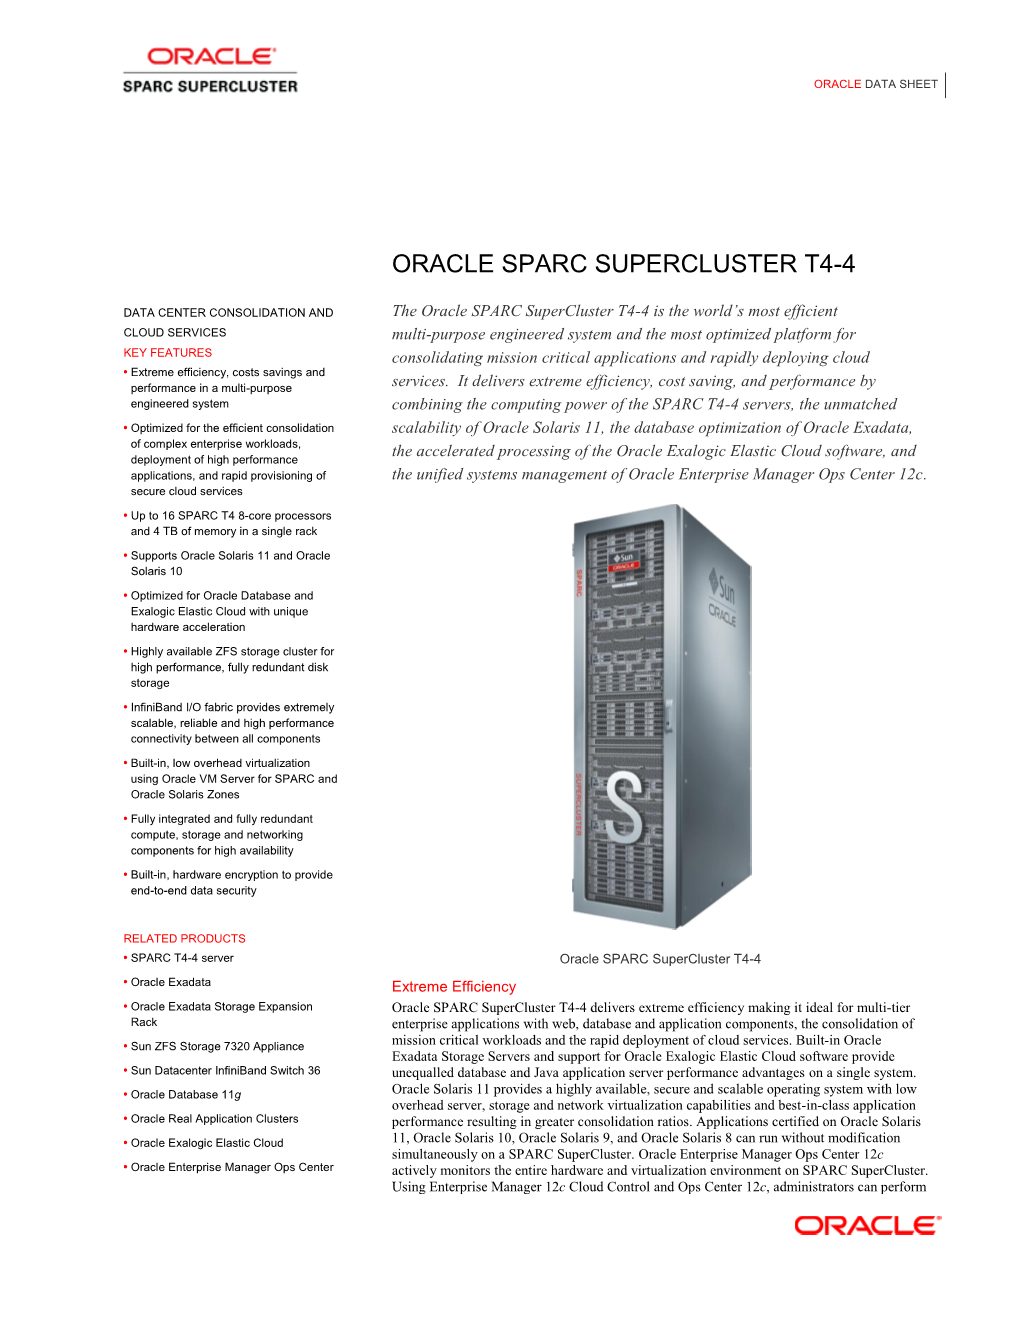 Oracle SPARC Supercluster T4-4 Data Sheet